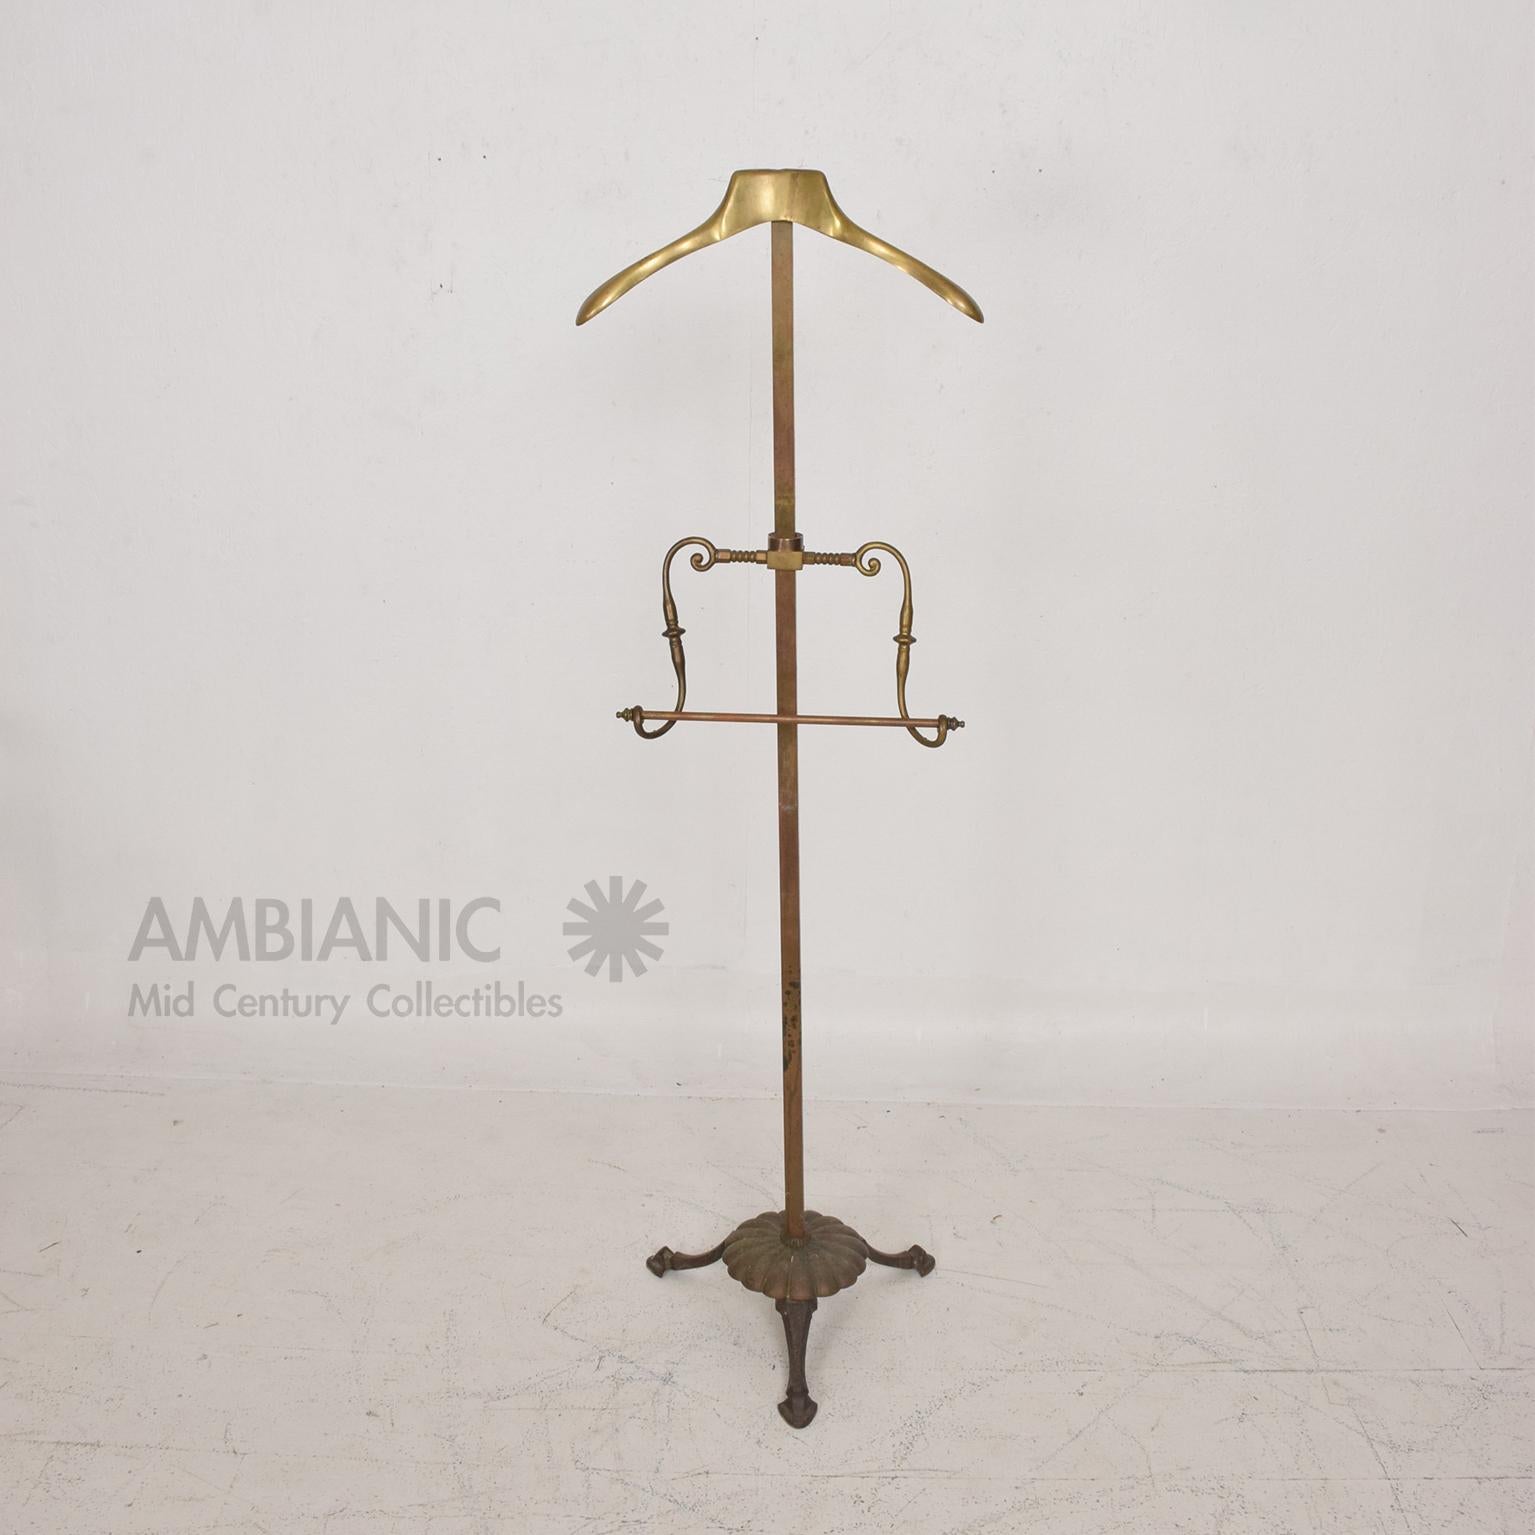 Valet Coat Rack
Gentleman's Sculptural Valet Coat Rack in Patinated Brass. Made in USA. Hollywood Regency 1970s
In the style of Charles Hollis Jones. Unmarked.
55 H x 17 W x 13.5 D
Original vintage condition unrestored with vintage patina. Minor